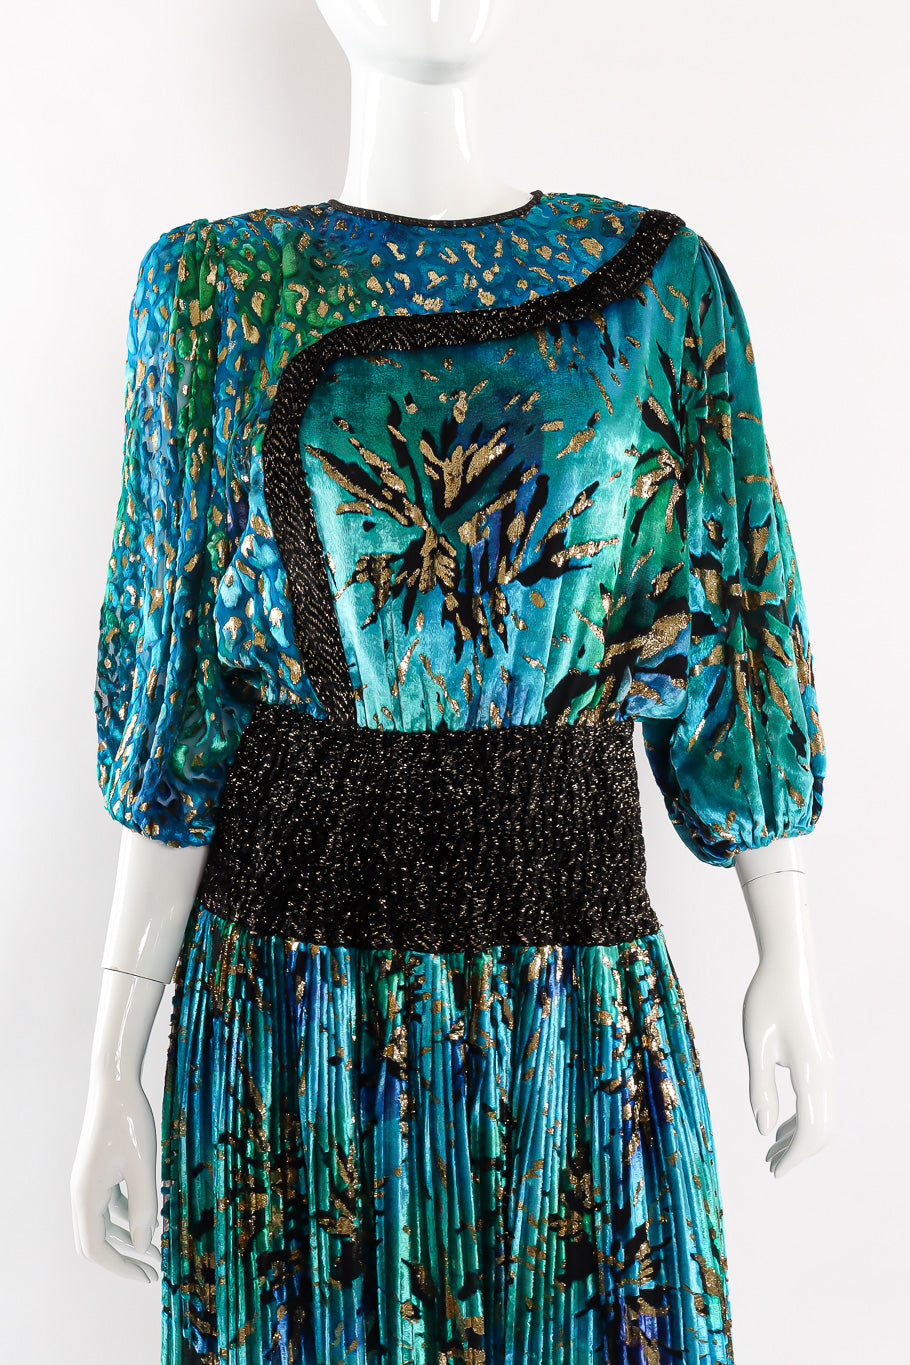 Multi-printed silk limited edition dress by Diane Freis Front on mannequin @recessla